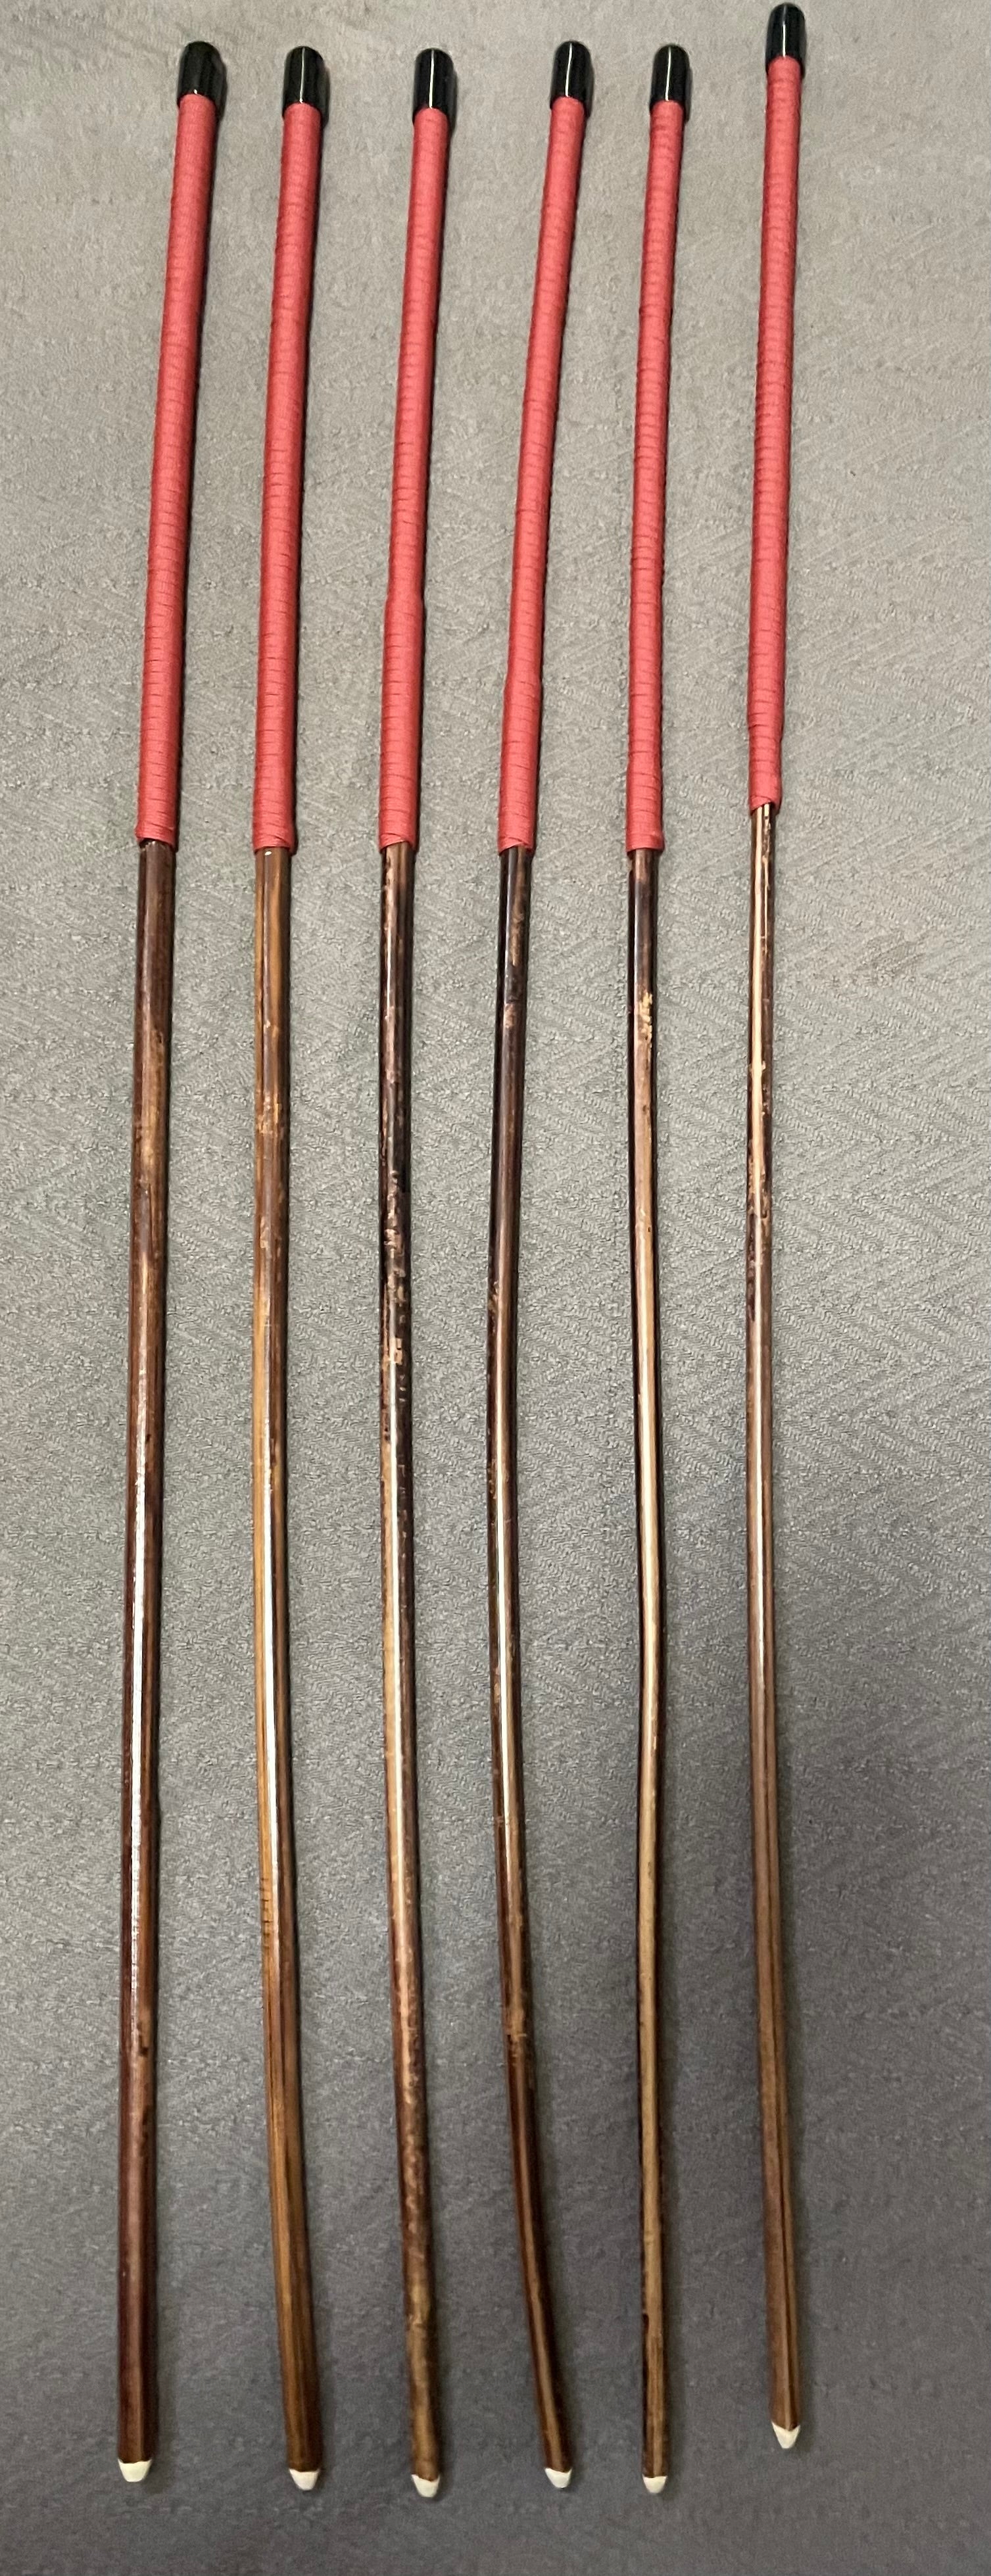 Set of 6 Knotless / No Knot Smoked Dragon Canes with Brick Red Handles - Englishvice Canes